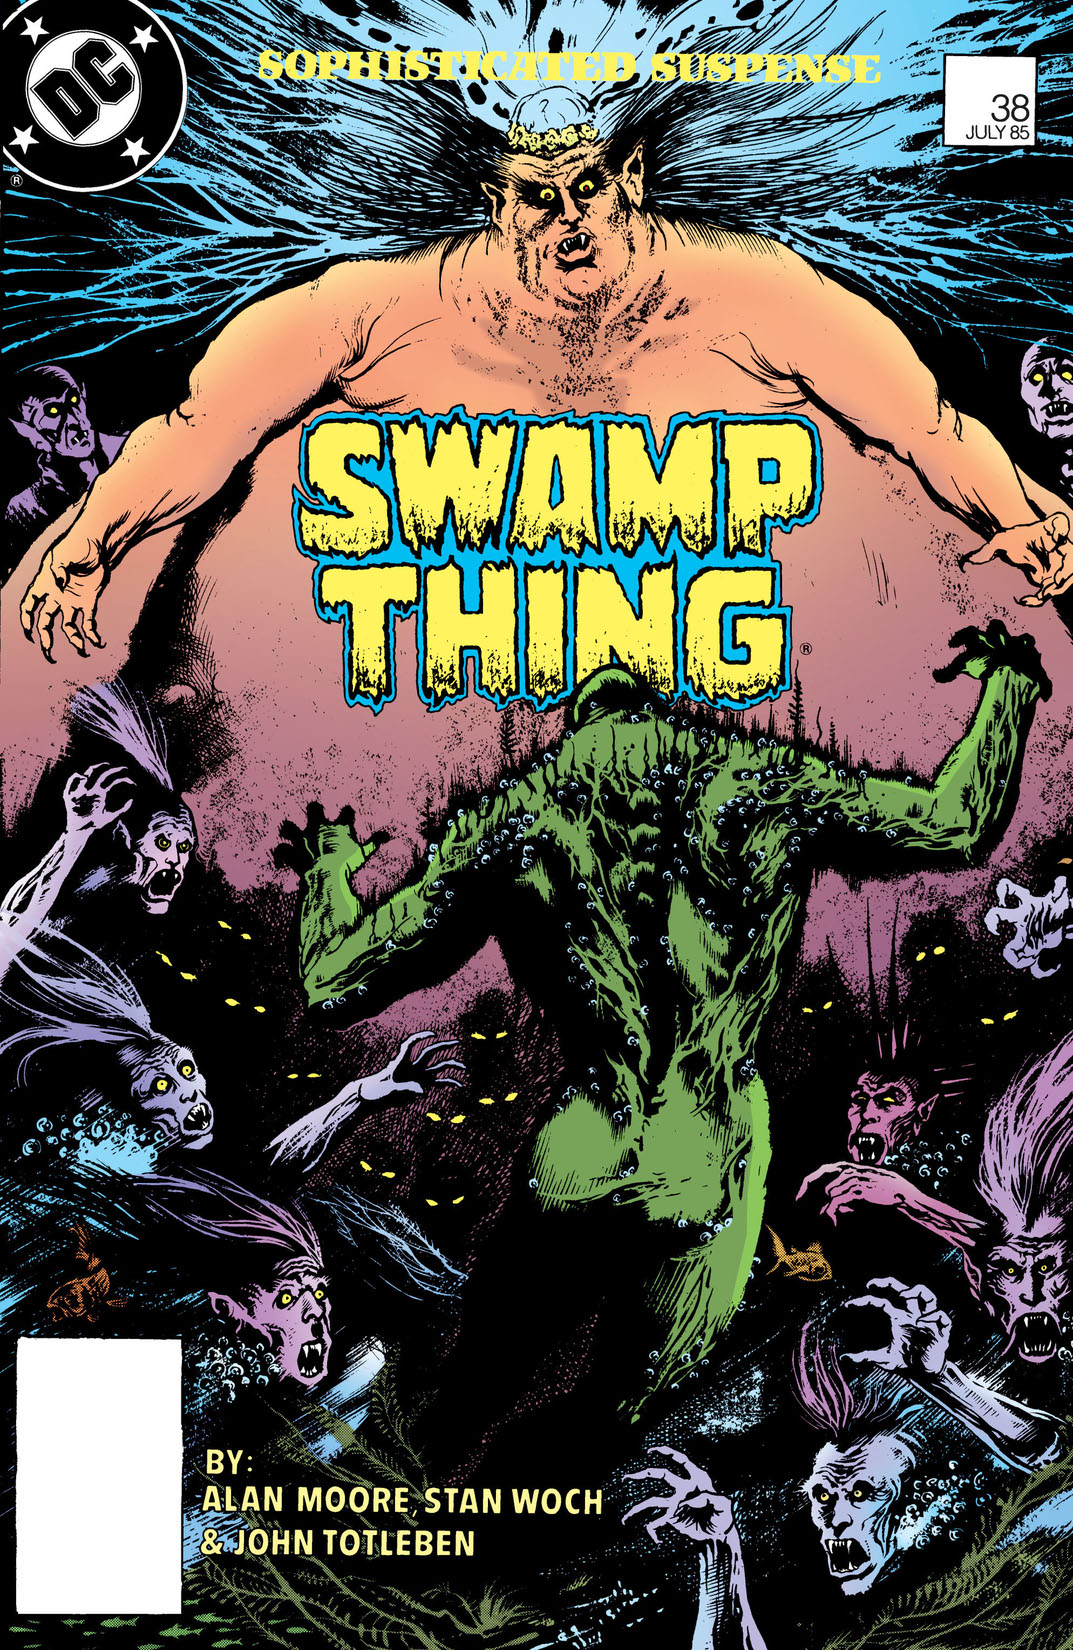 The Saga of the Swamp Thing (1982-) #38 preview images